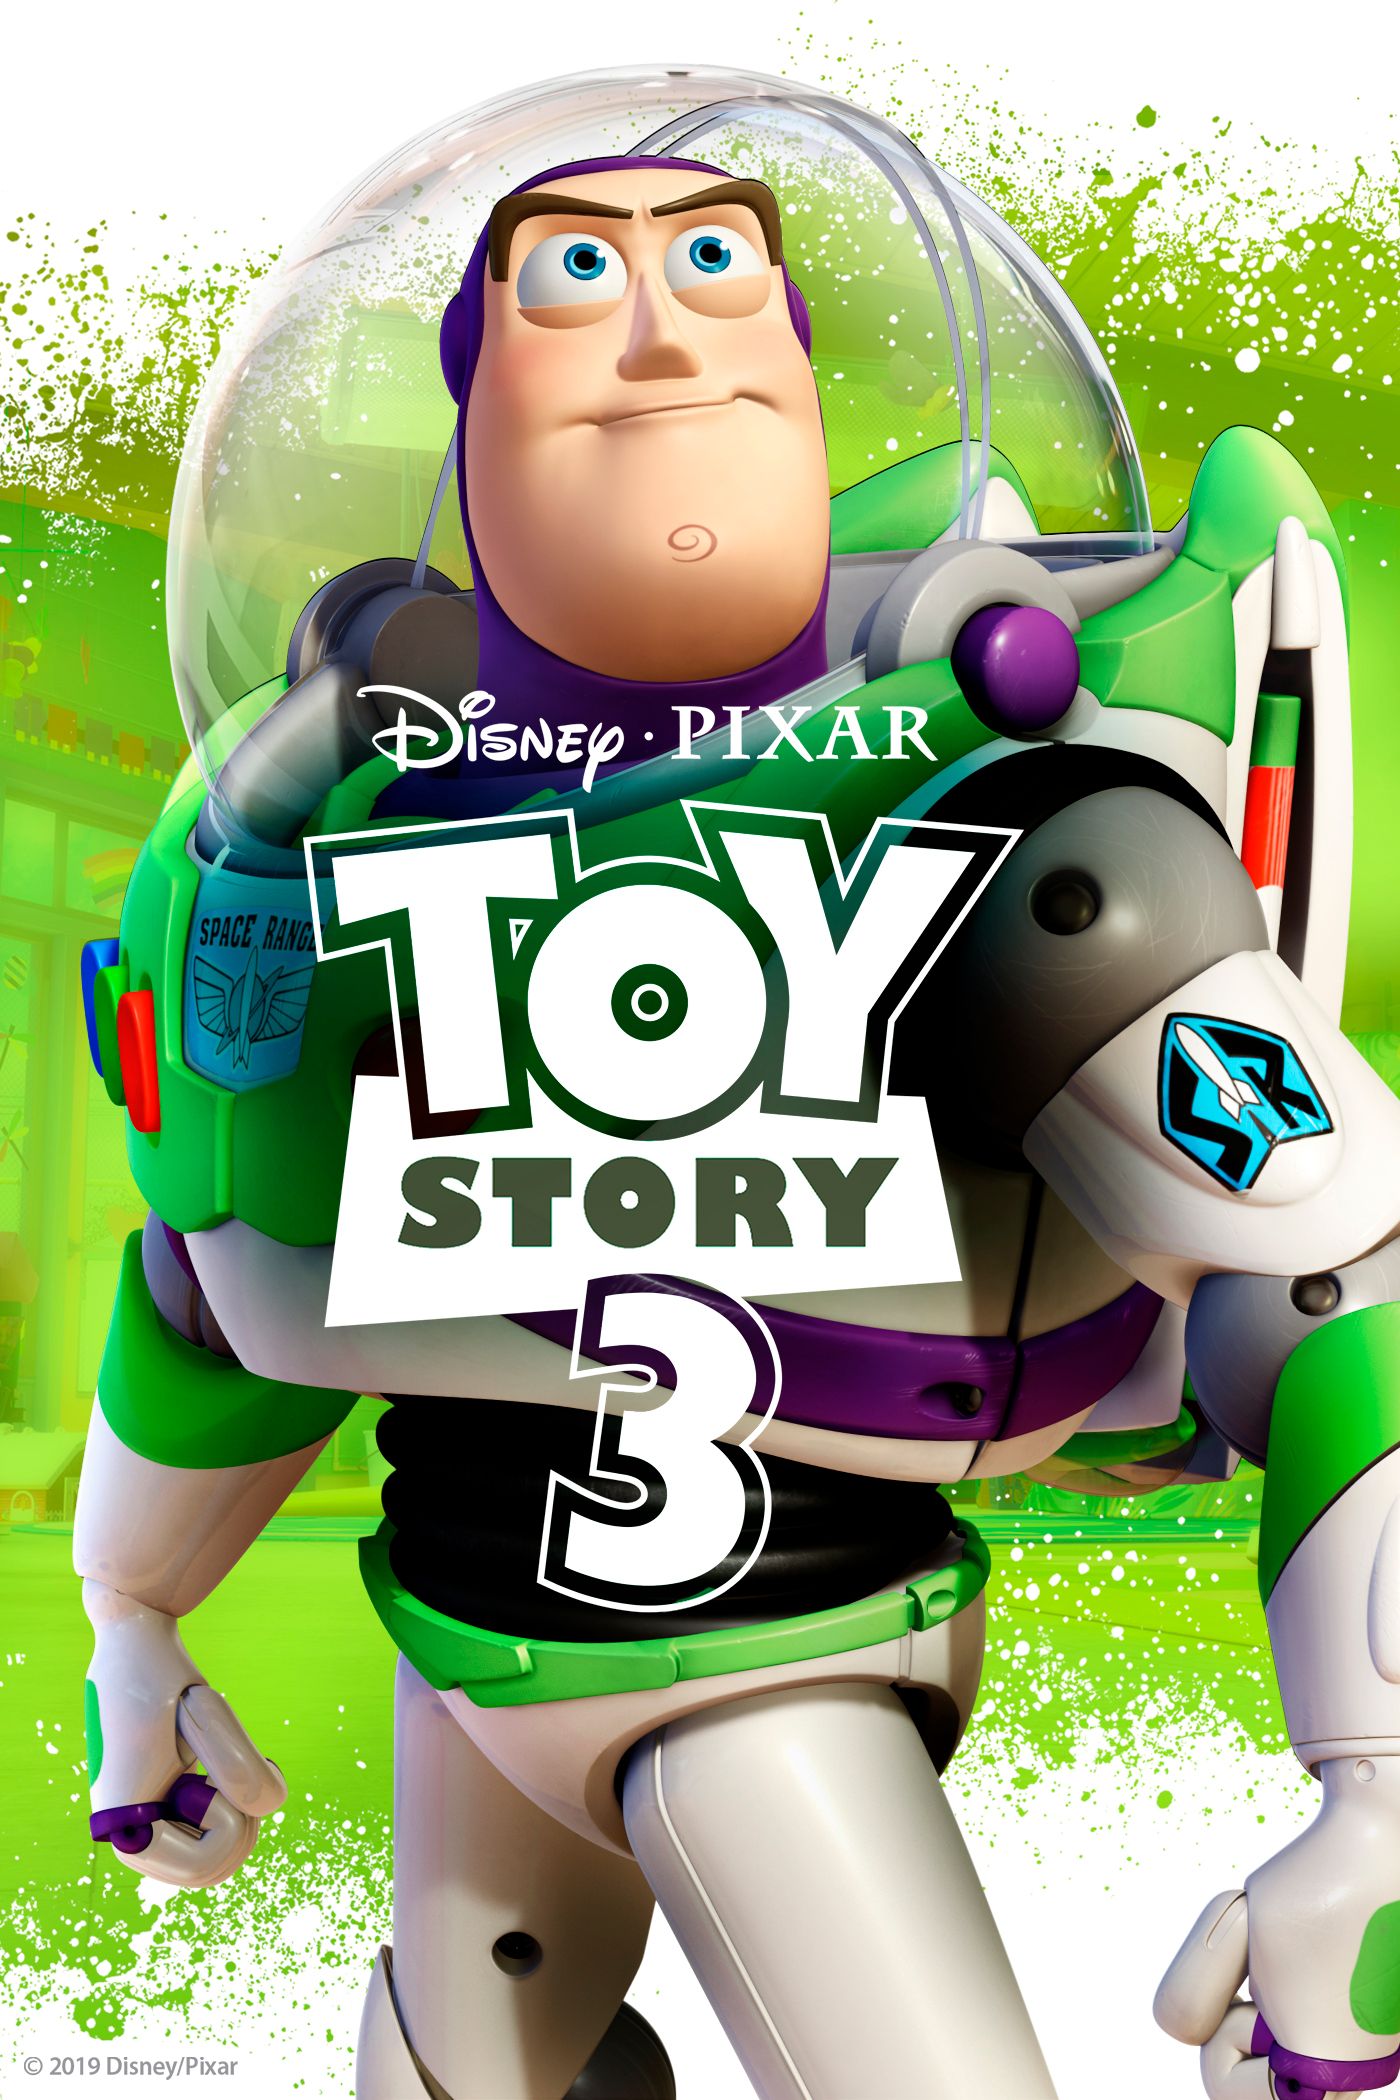 Toy Story 3 | Movies Anywhere